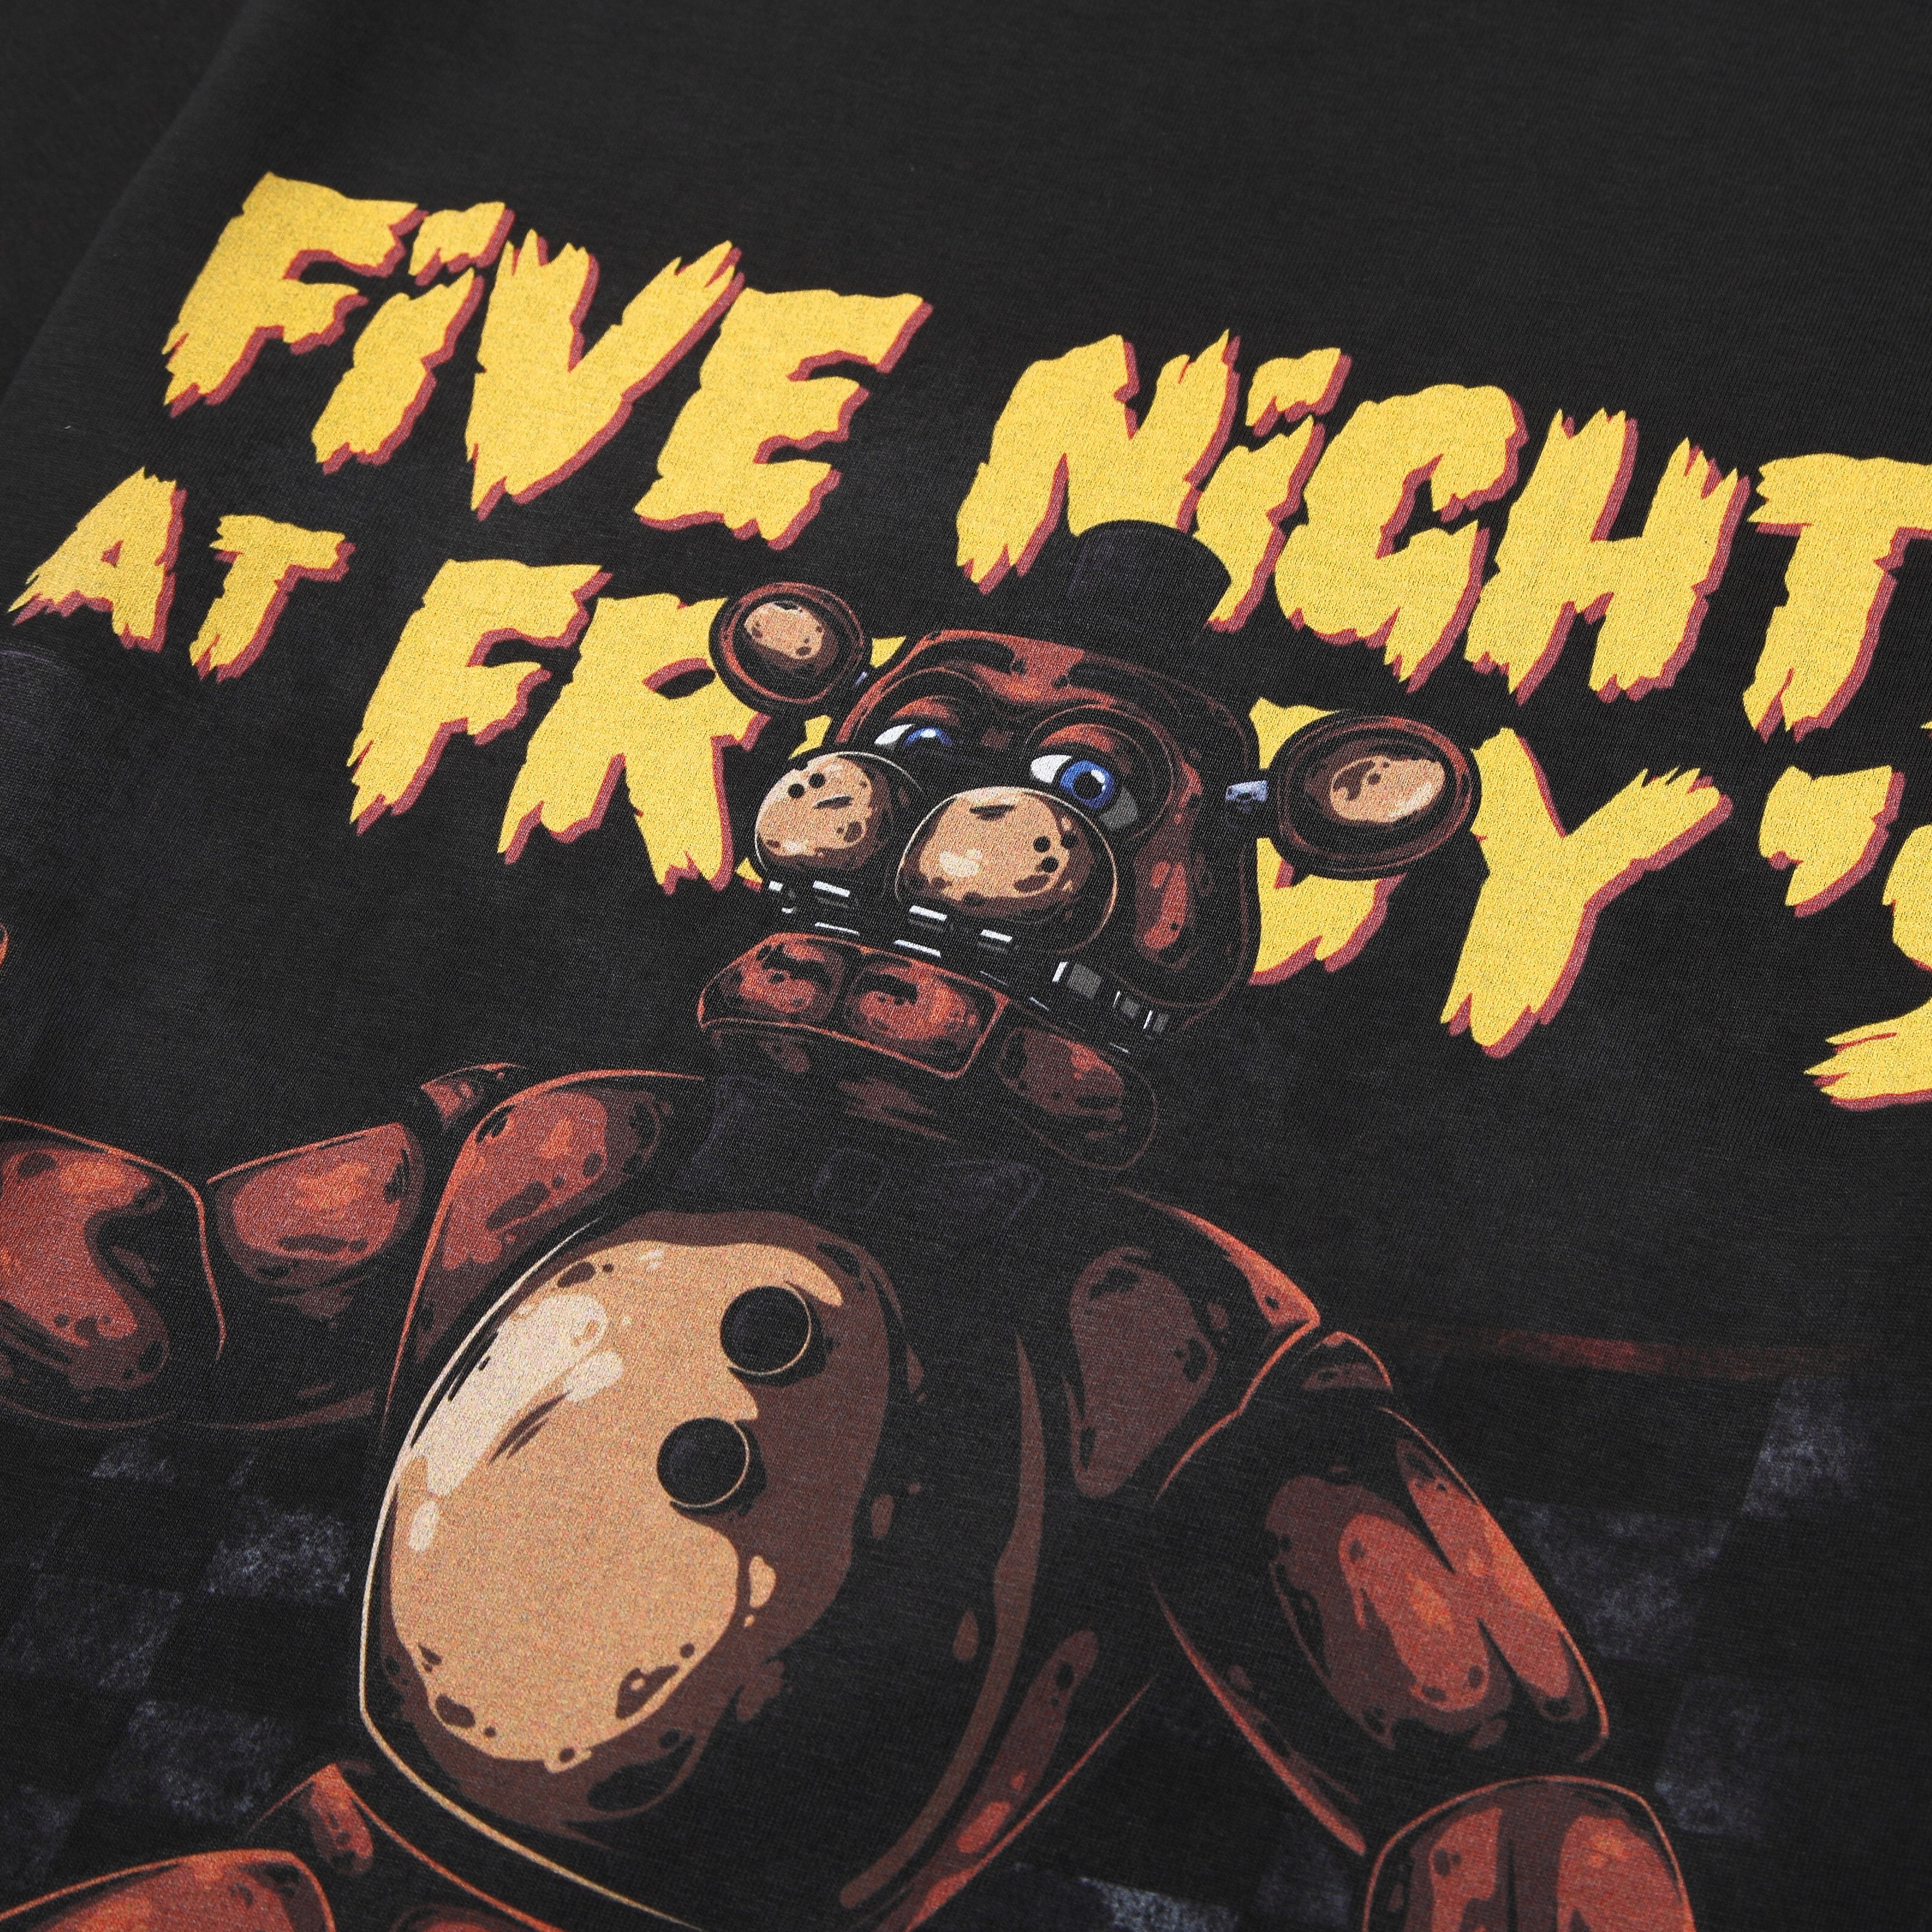 Five Nights At Freddys Posters for Sale